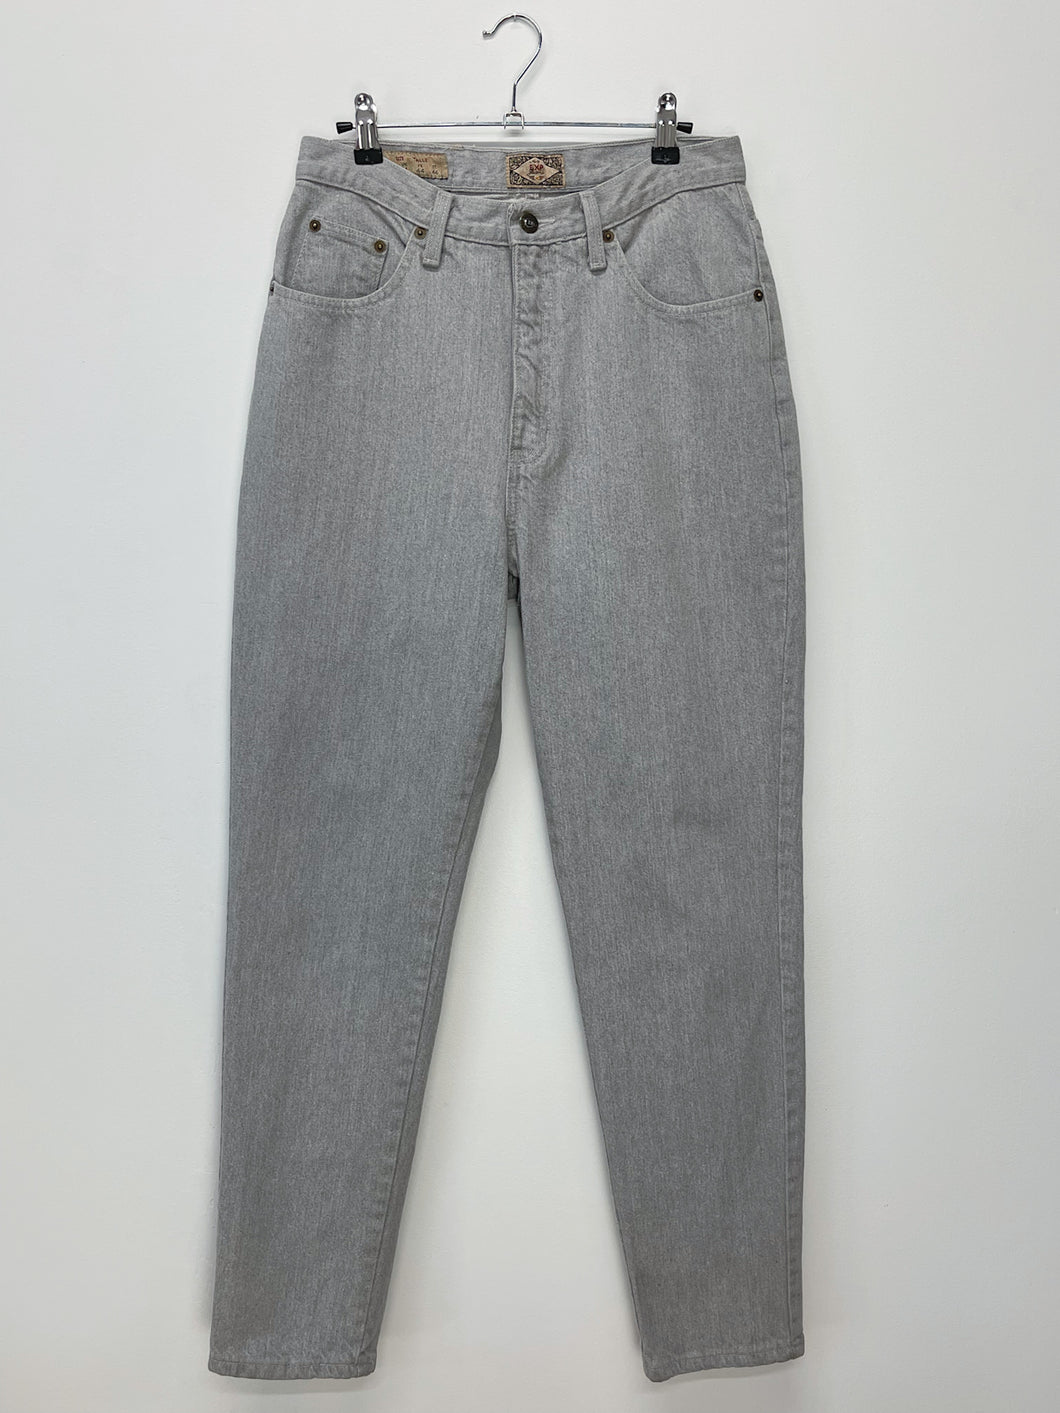 80s Express High Waisted Grey Jeans (W29